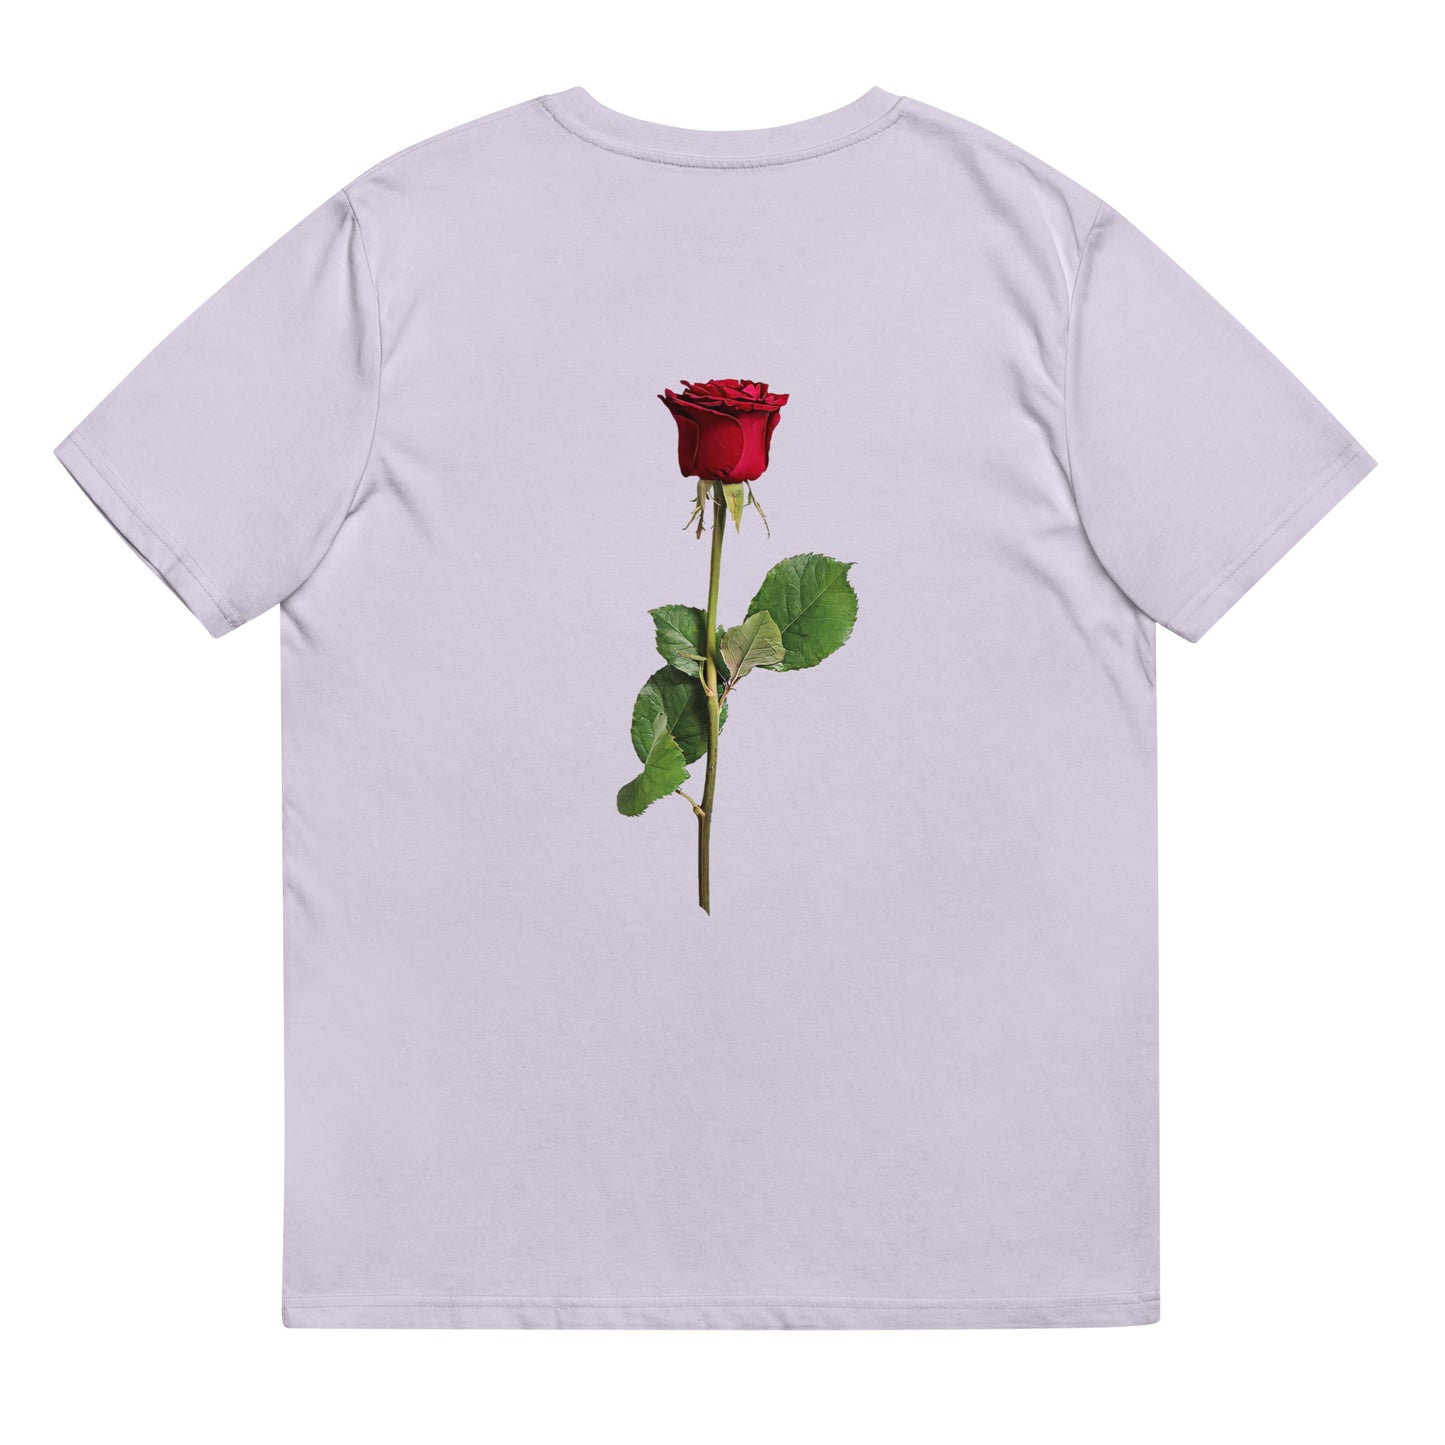 Assi embroidered & red flower unisex t-shirt